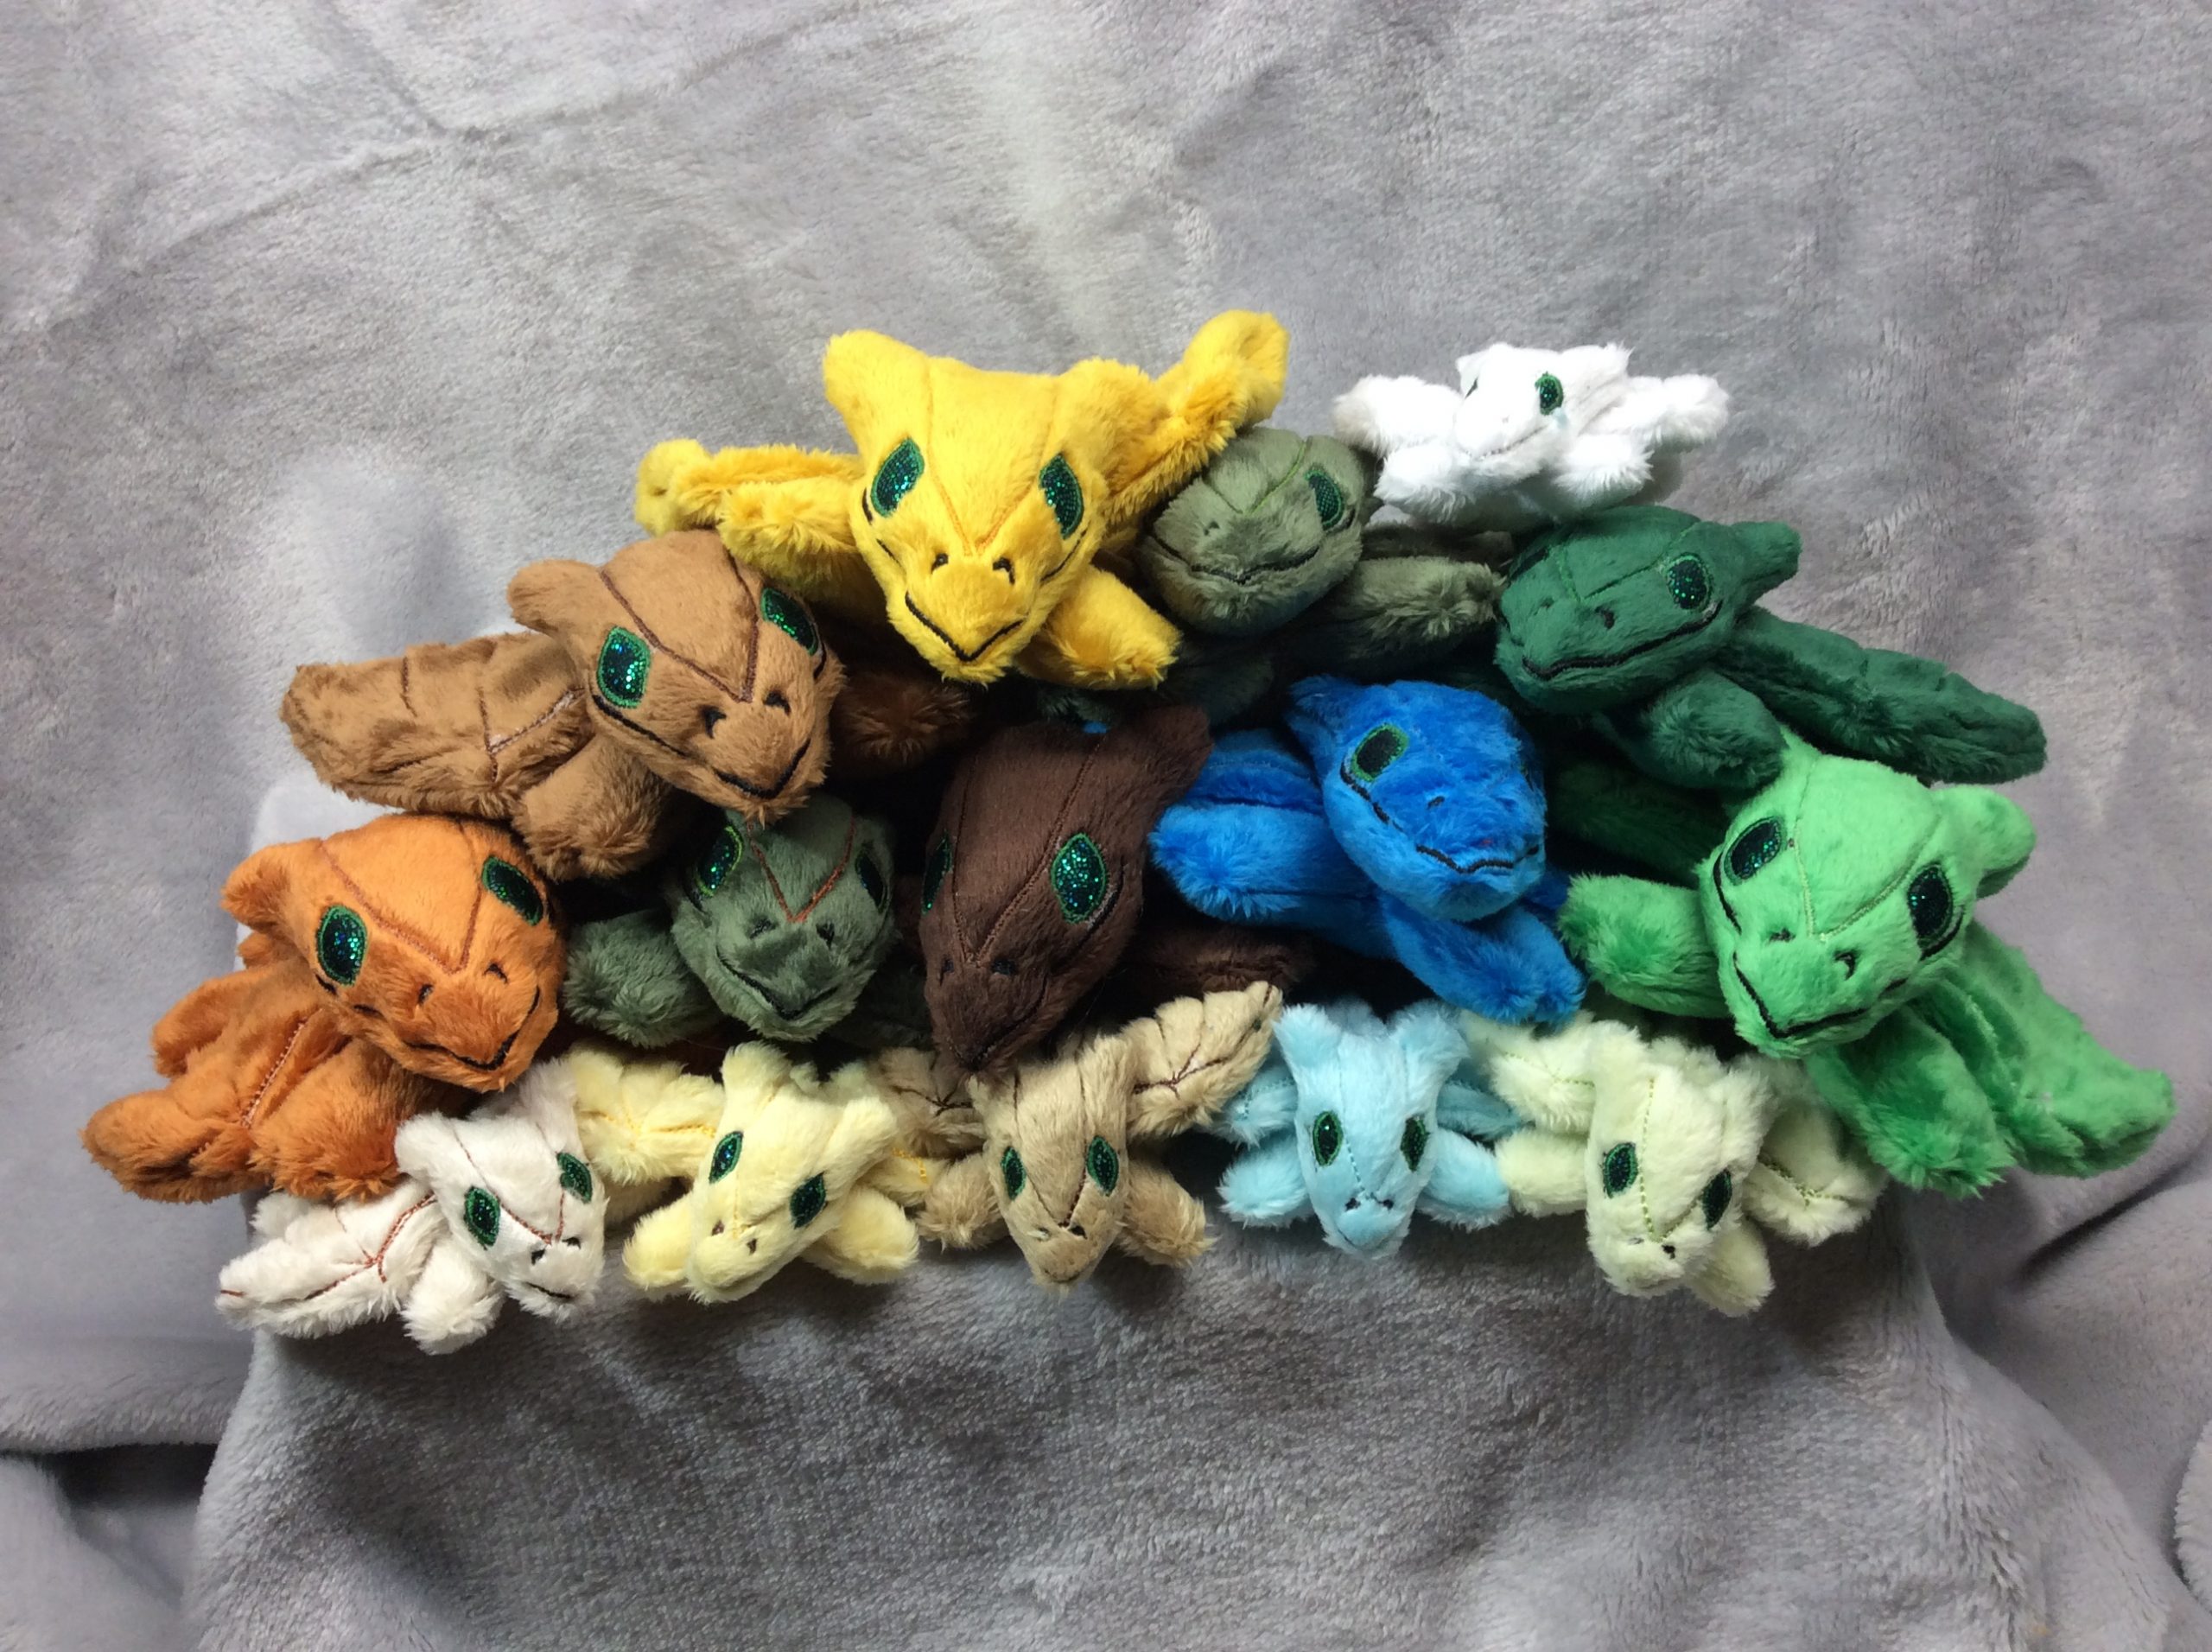 New colors of beanie dragons are going into the shop